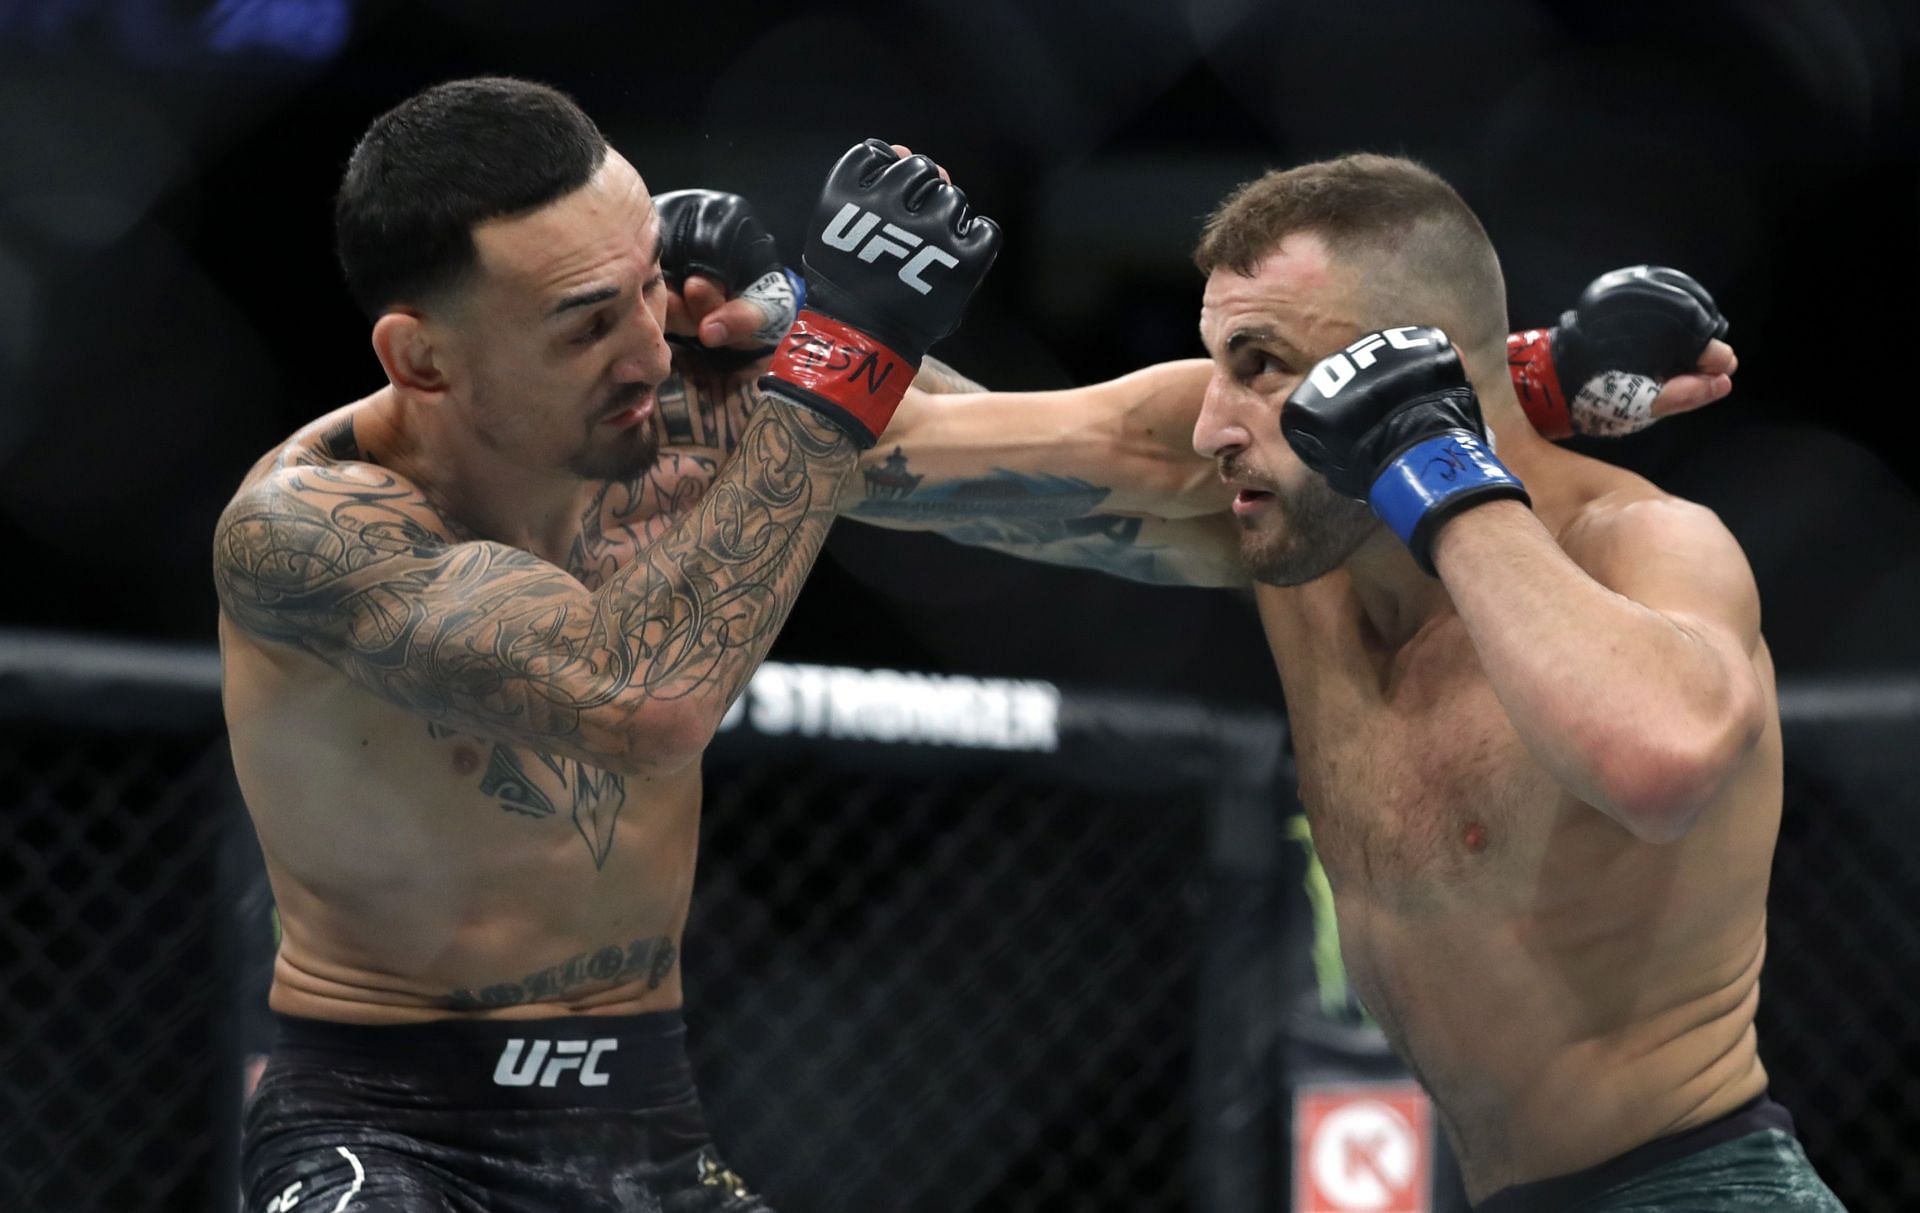 After defeating him twice previously, should Alexander Volkanovski really have to fight Max Holloway again?